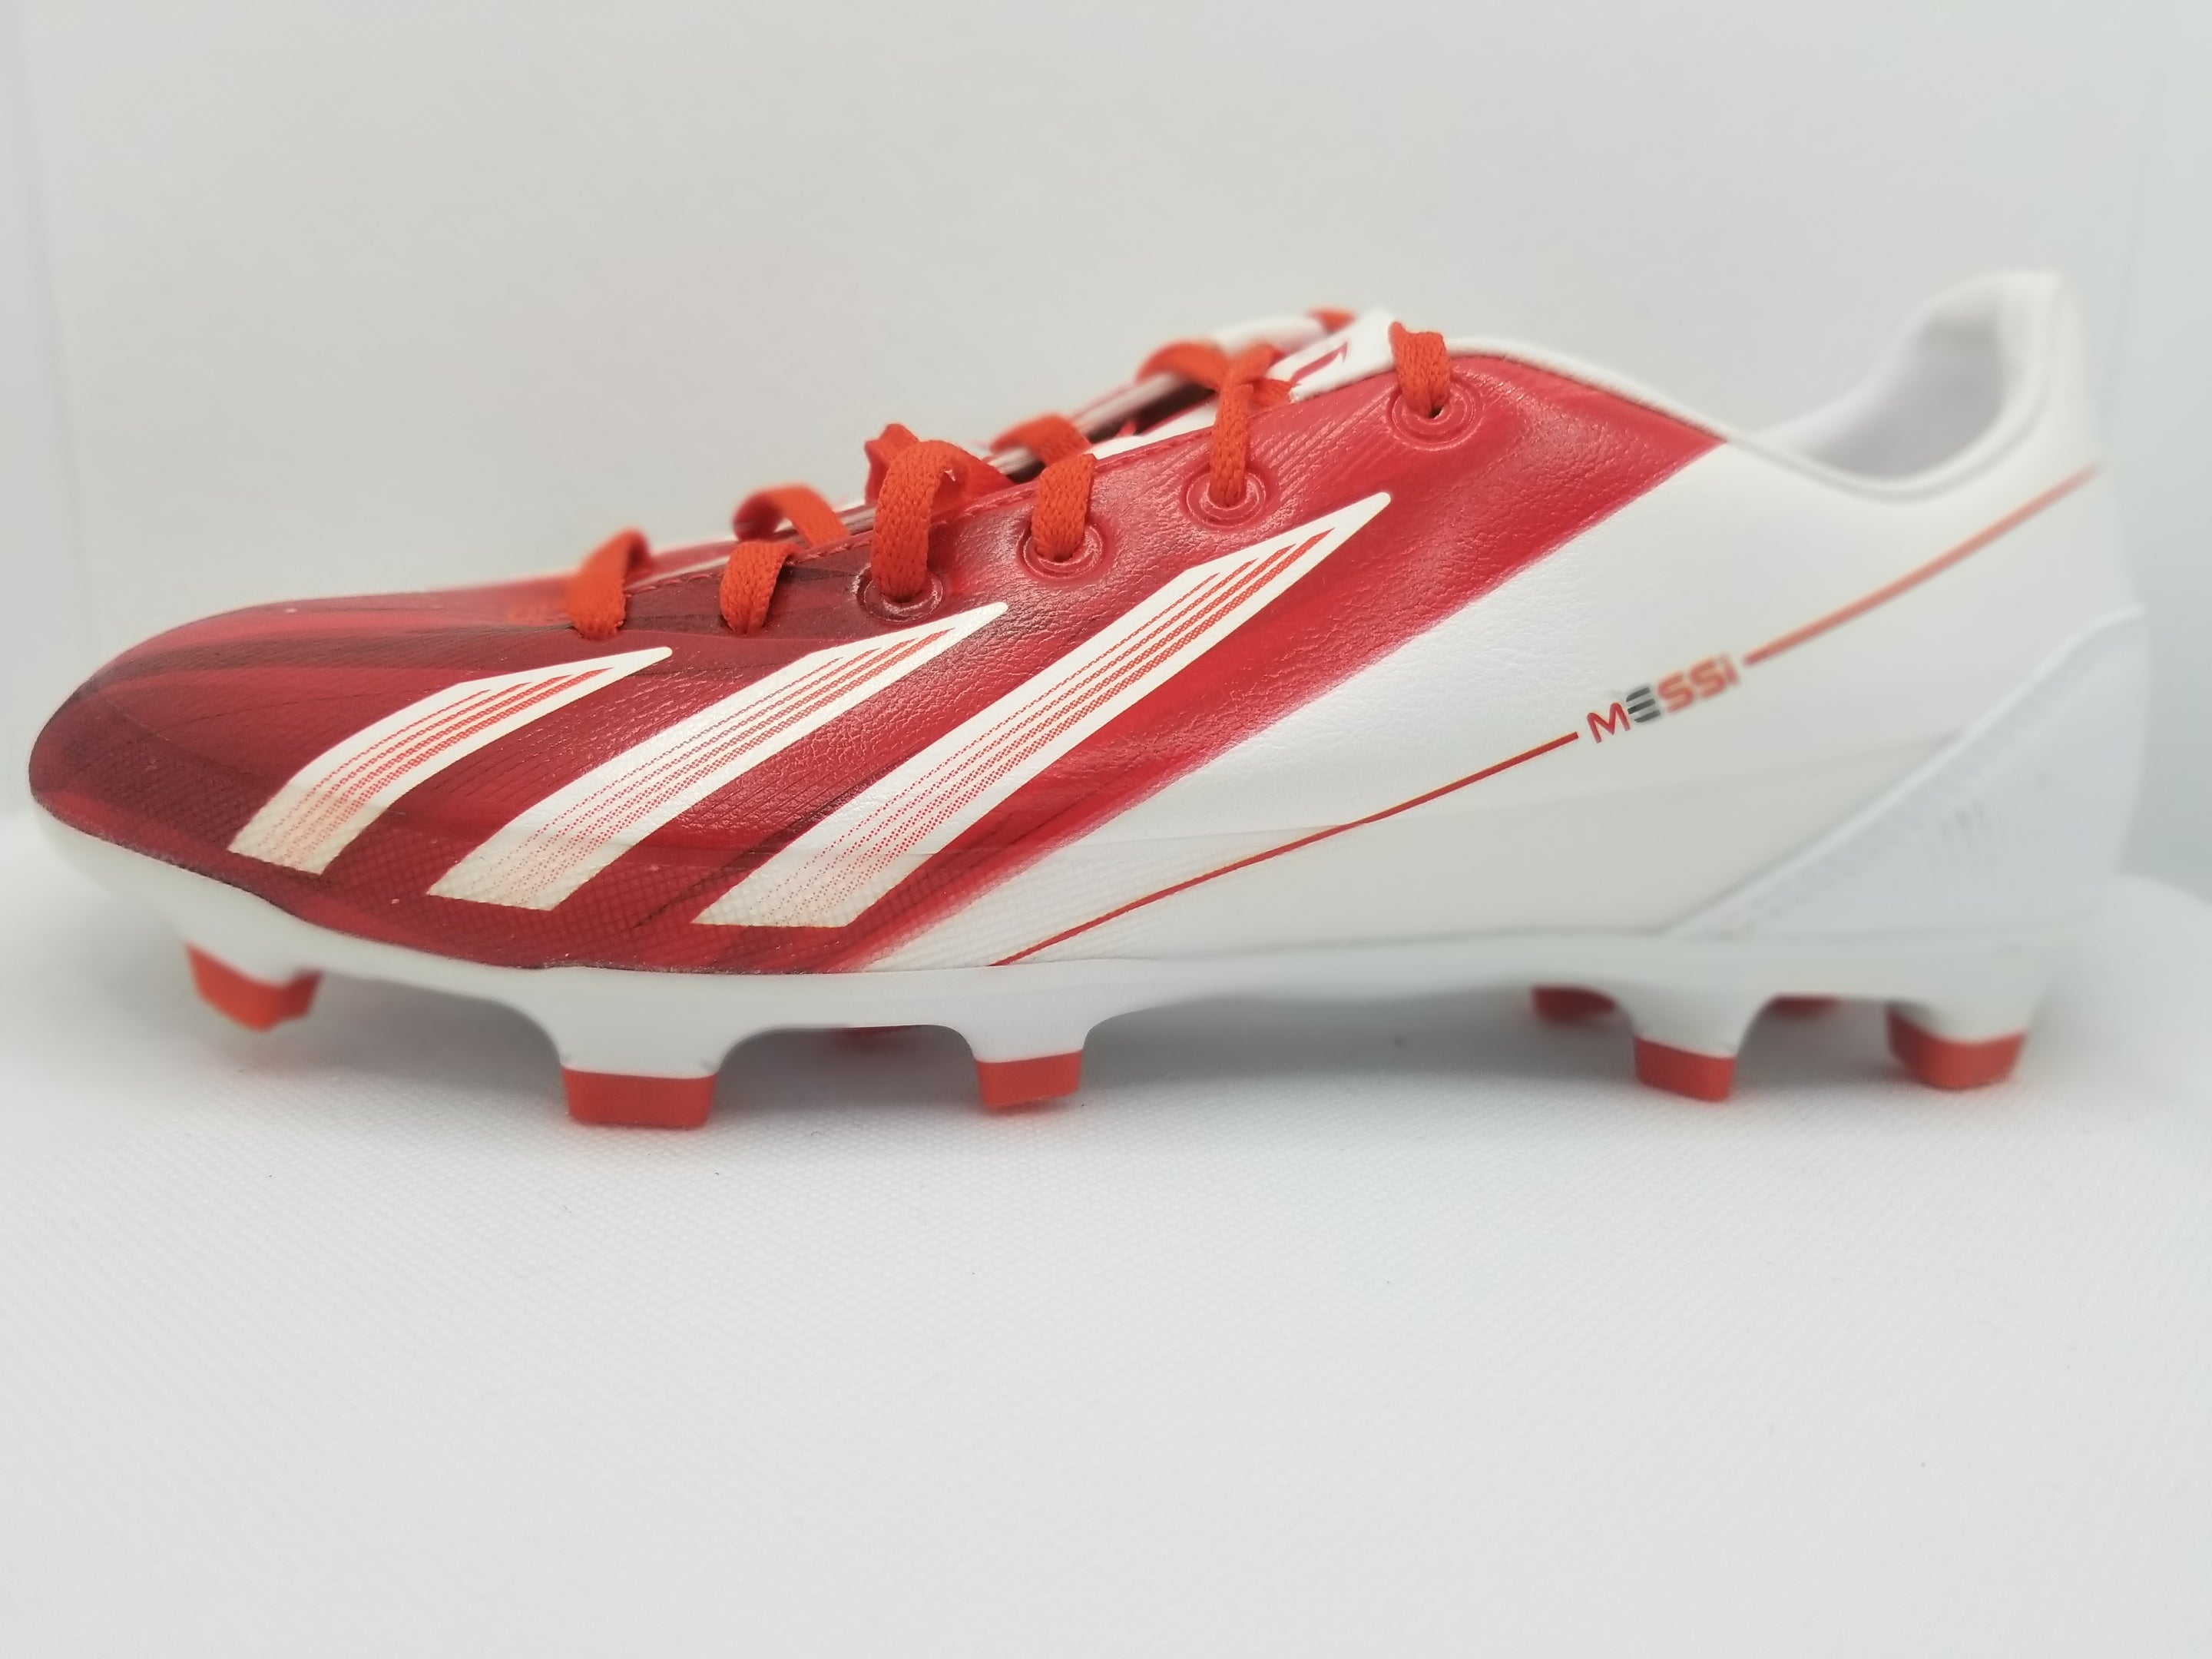 Conceit Grens Mew Mew Adidas F30 TRX Messi FG – Nyong Boots